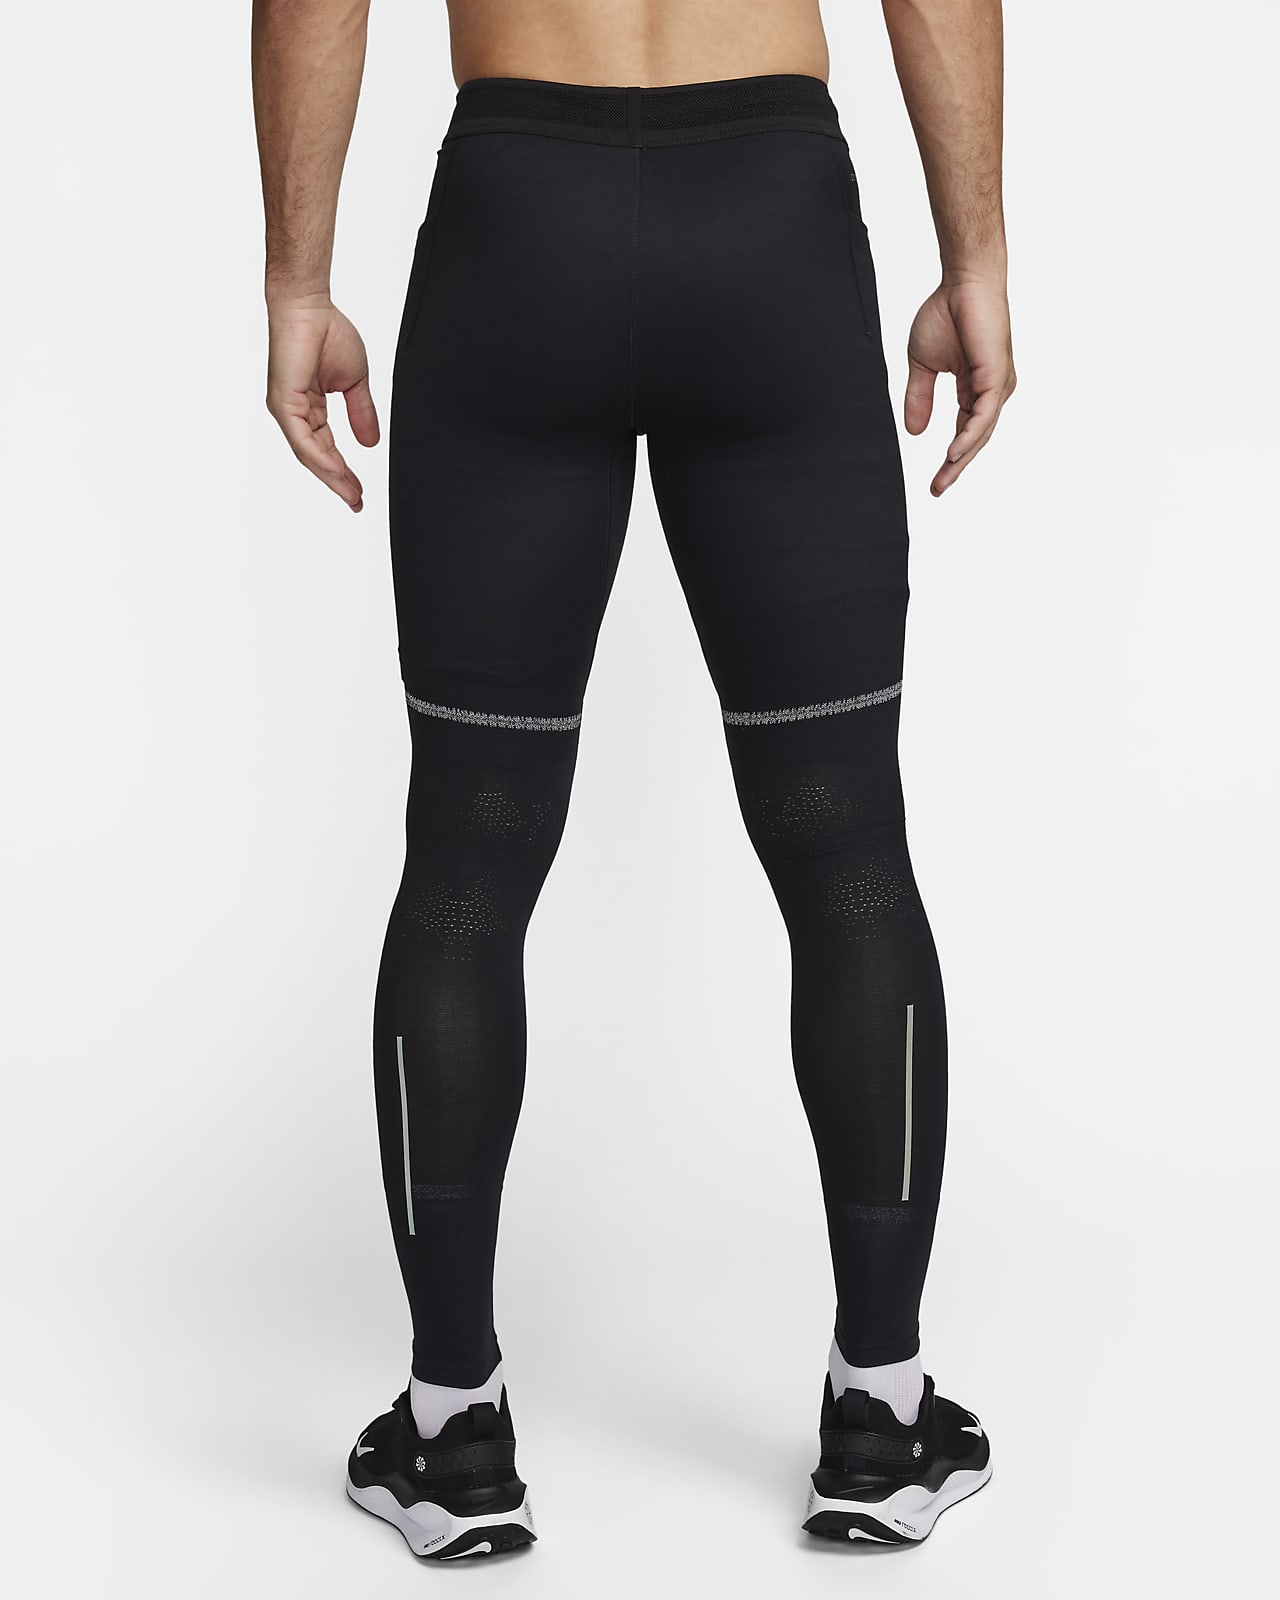 https://static.nike.com/a/images/t_PDP_1280_v1/f_auto,q_auto:eco/c9d09134-4993-489c-97f0-5529a874c4ac/running-division-mens-dri-fit-adv-running-tights-zfKzh4.png